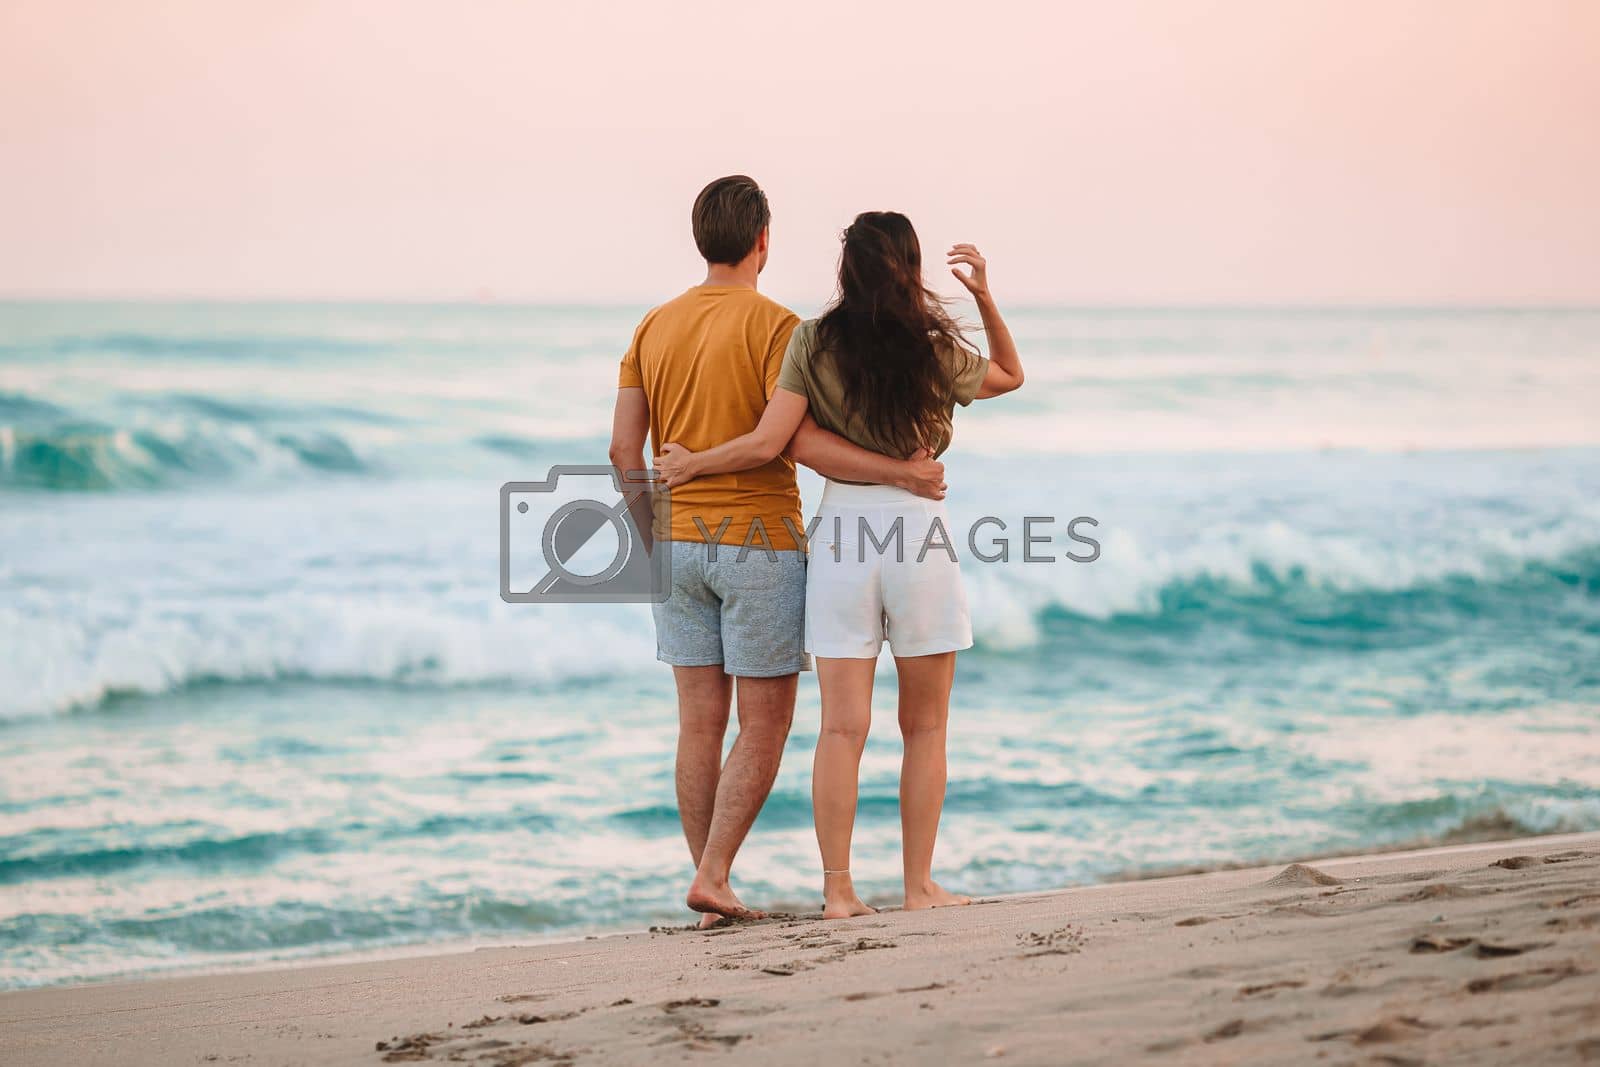 Royalty free image of Young couple on the beach vacation in Florida at sunset by travnikovstudio